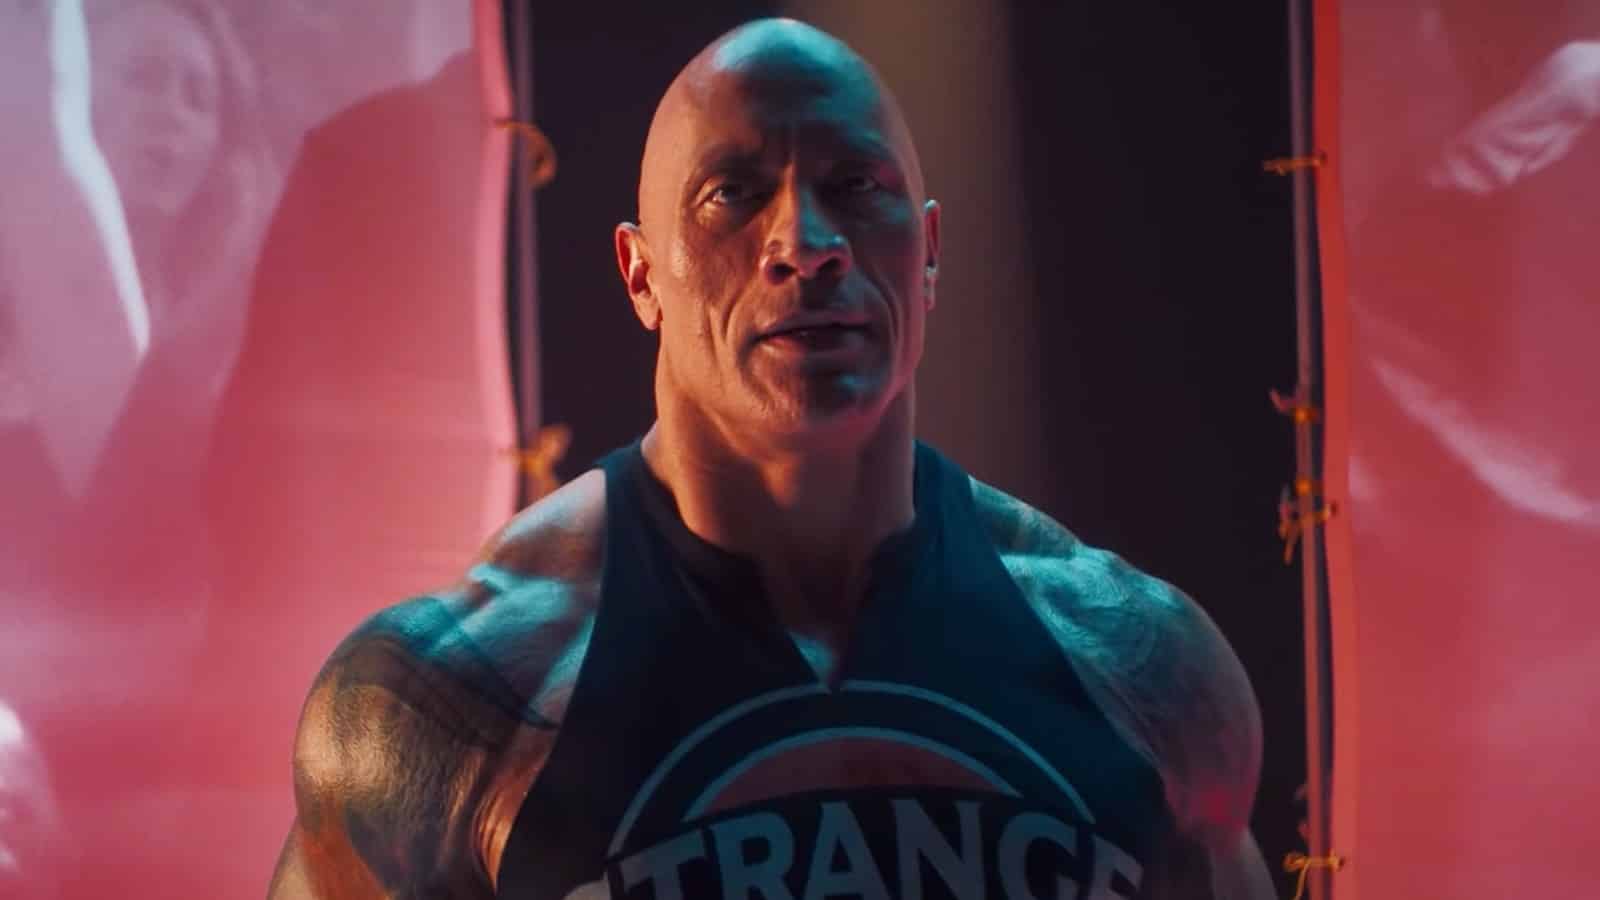 Dwayne Johnson performing in a music video